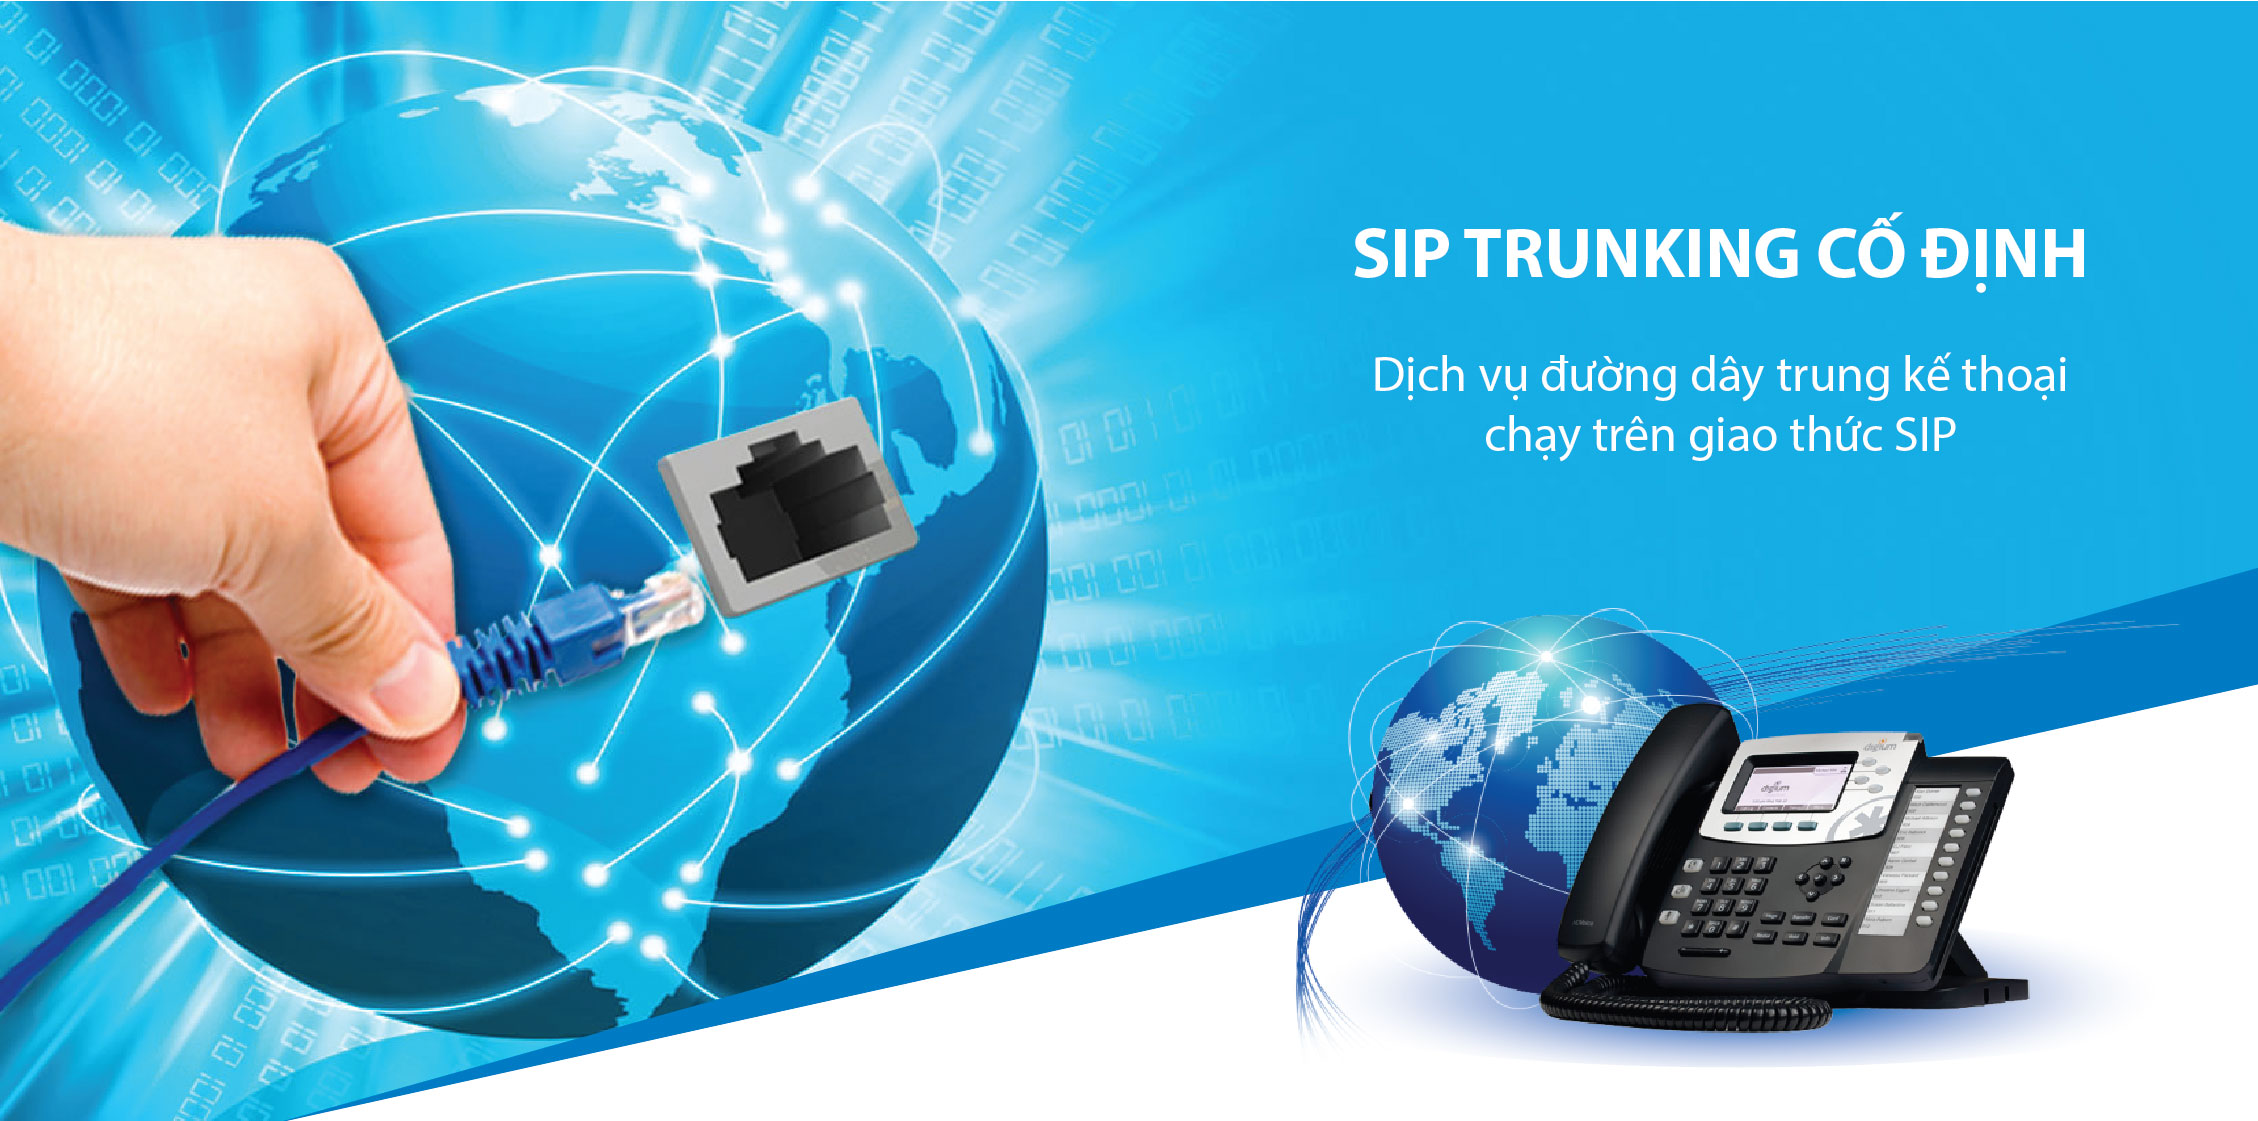 Sip Trunking Co Dinh